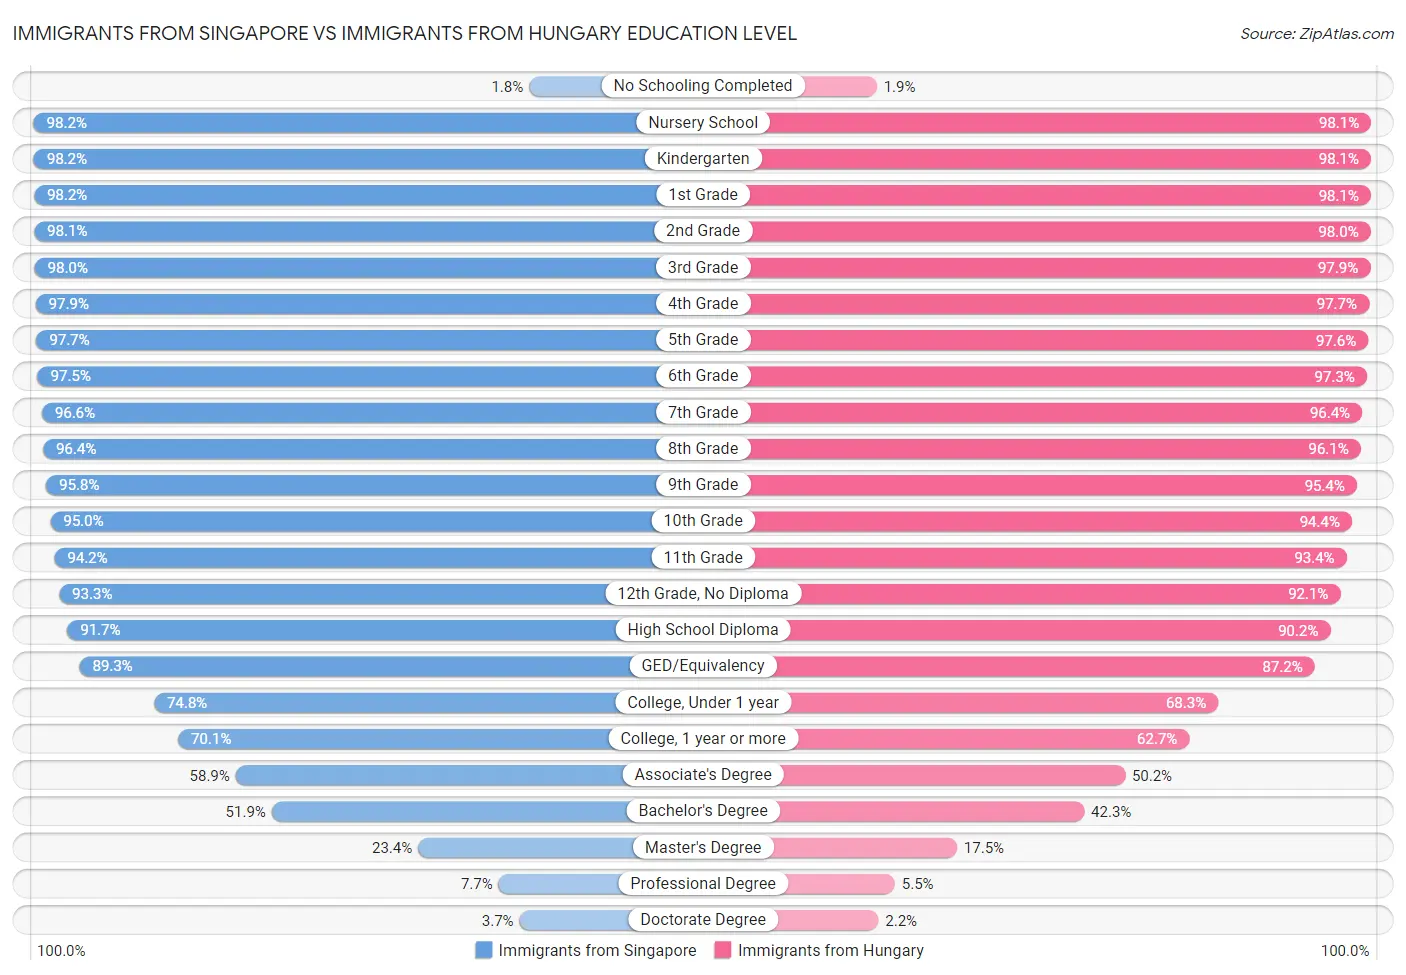 Immigrants from Singapore vs Immigrants from Hungary Education Level